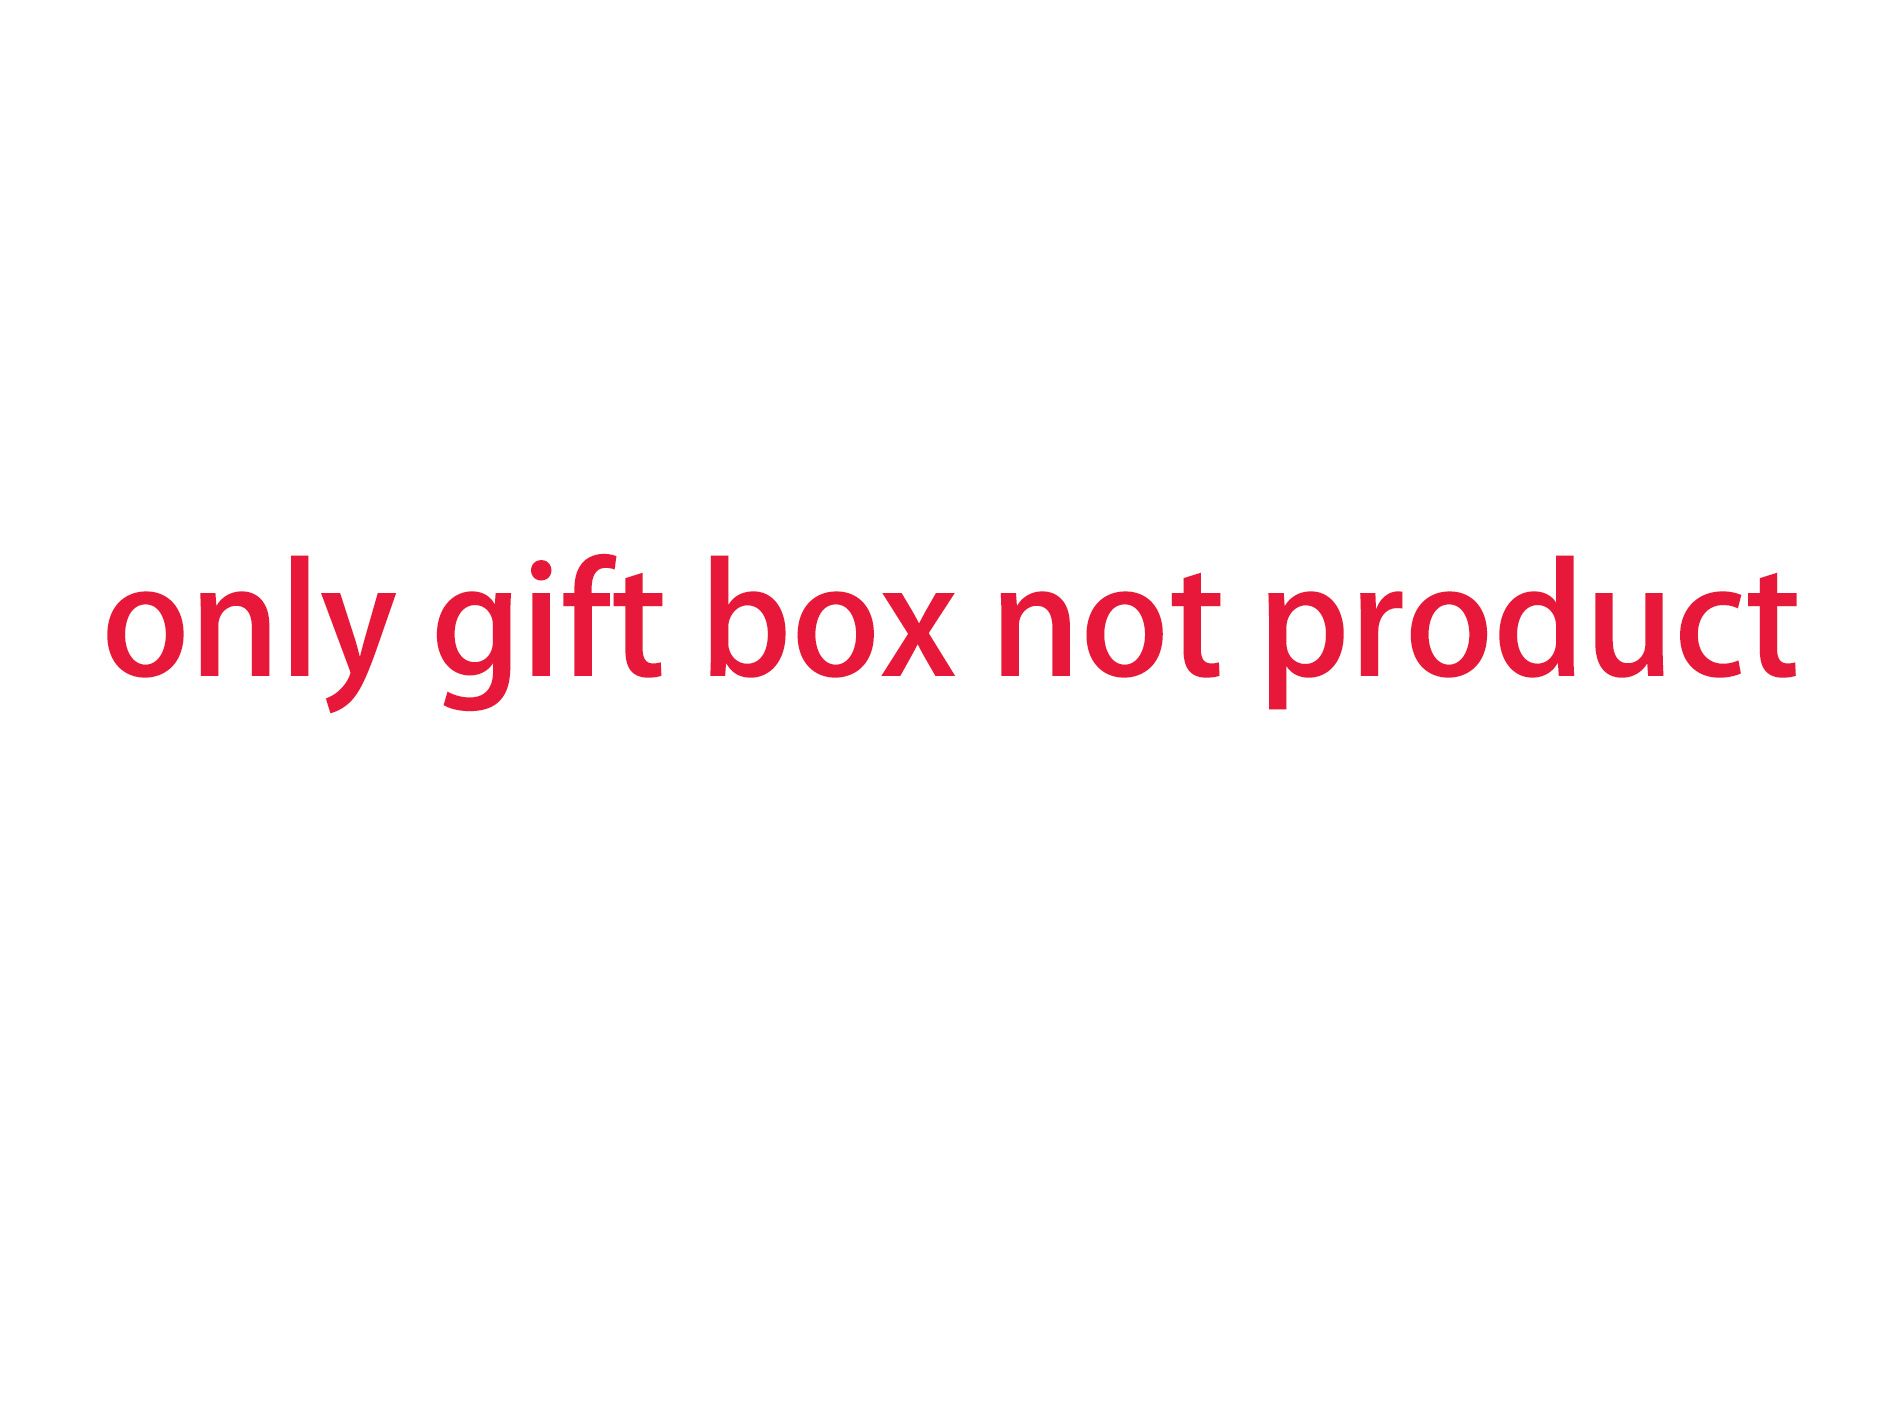 ony gift box not product